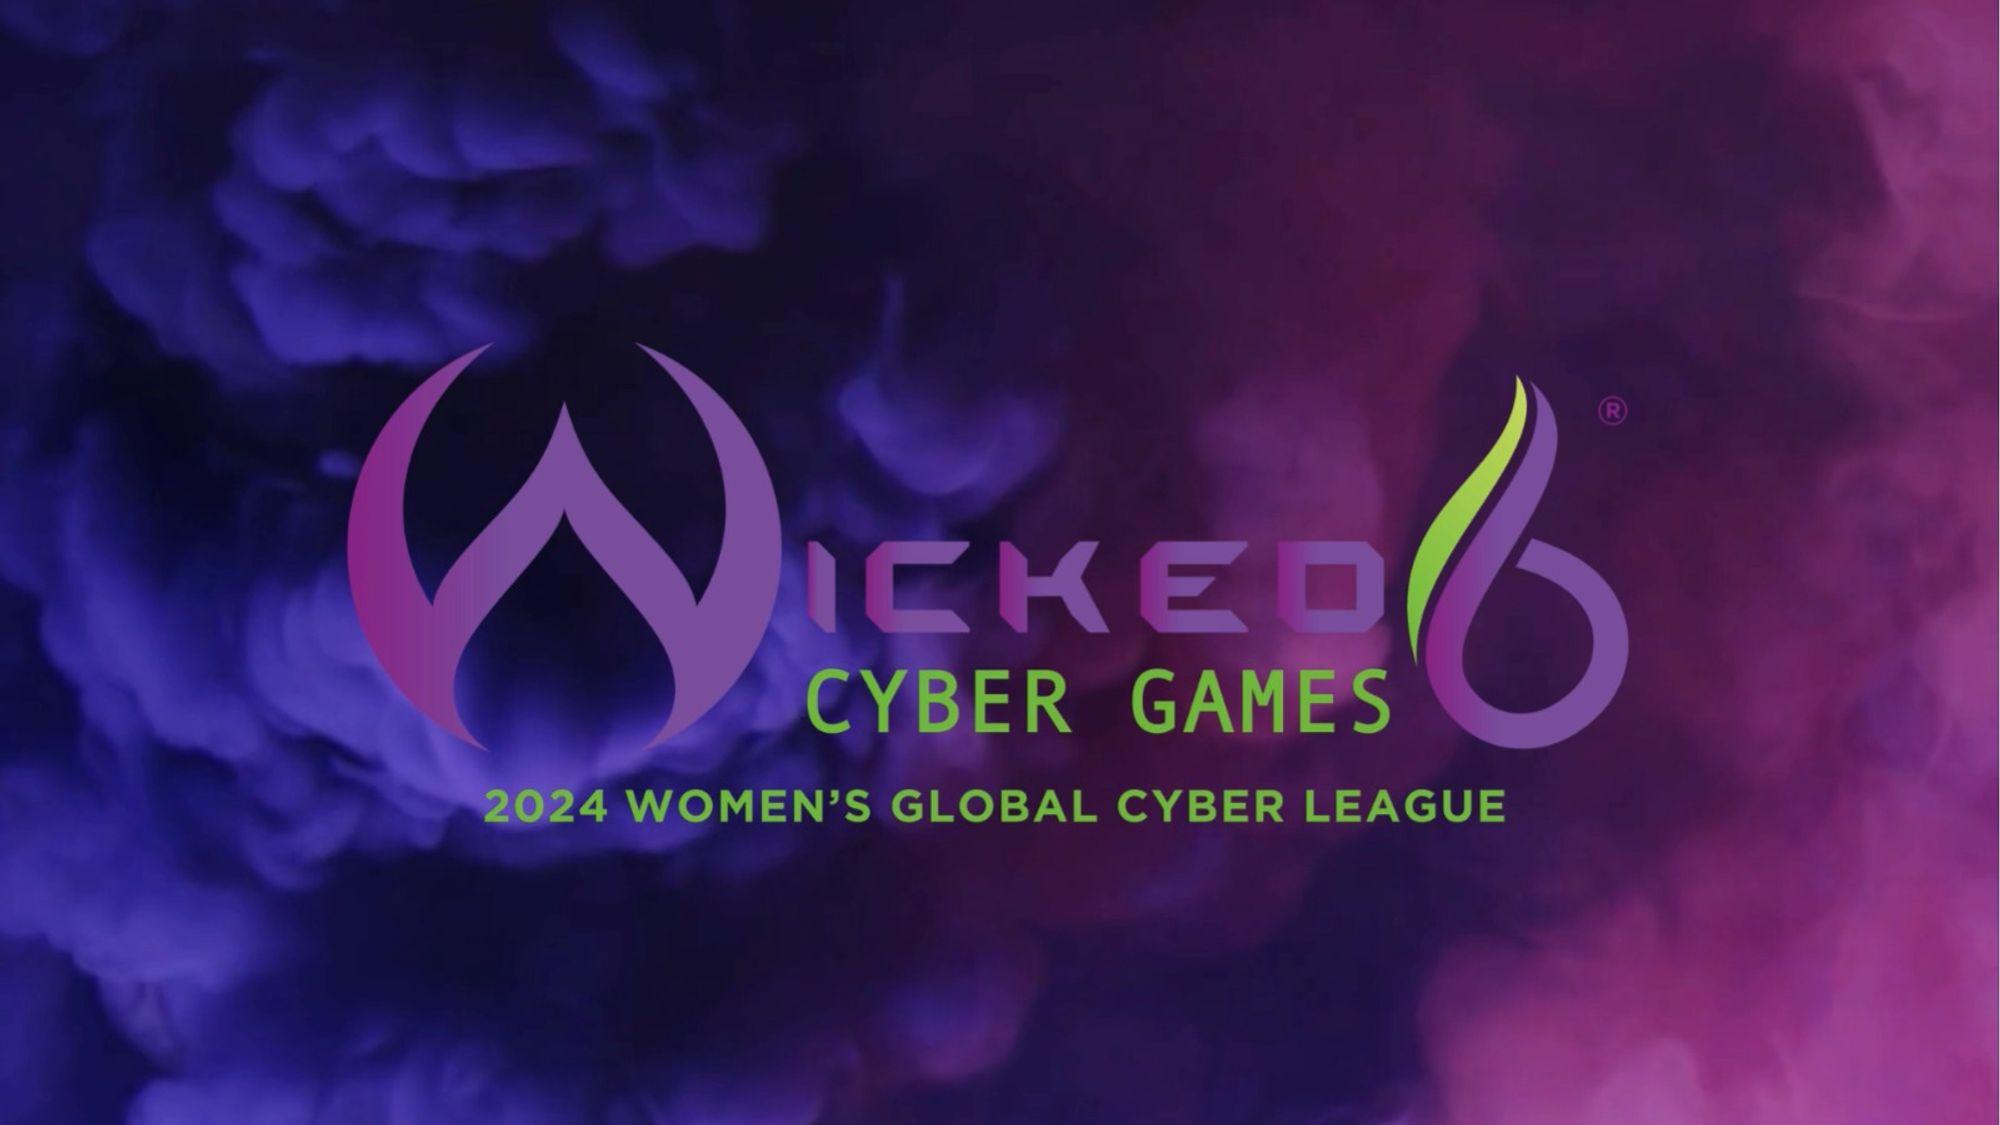 4 Wins for the Wicked6 Cyber Games Series